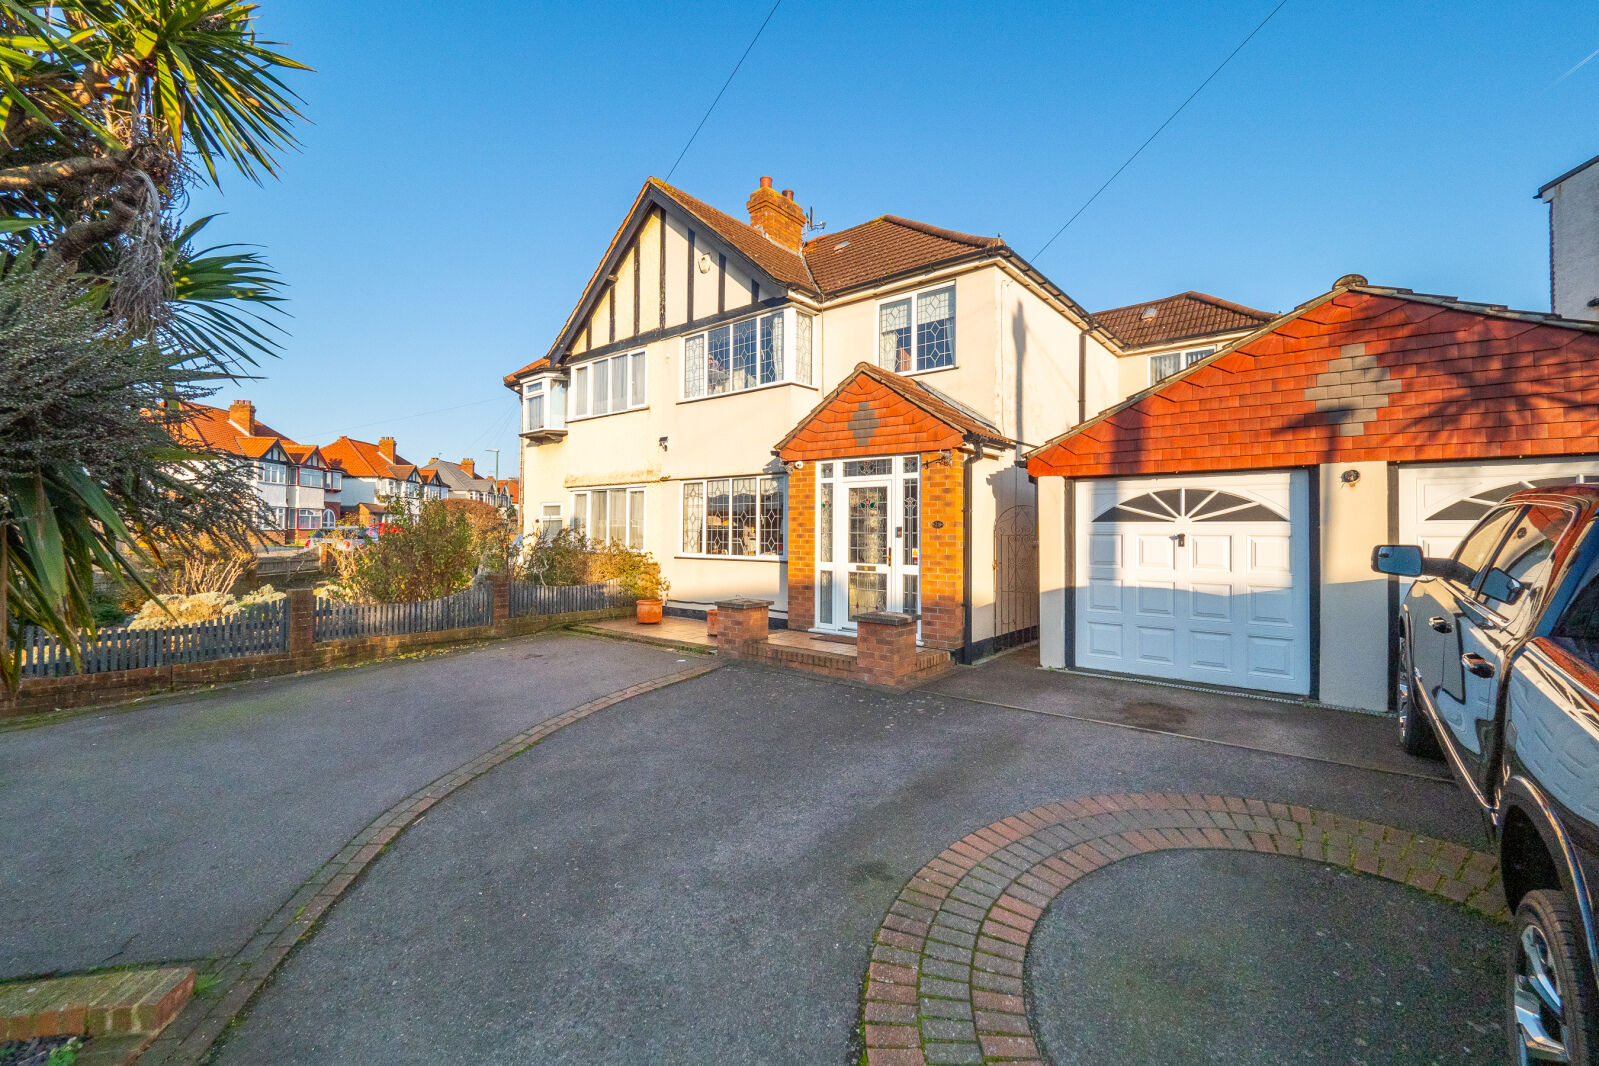 3 bedroom semi detached house for sale Burleigh Road, Sutton, SM3, main image